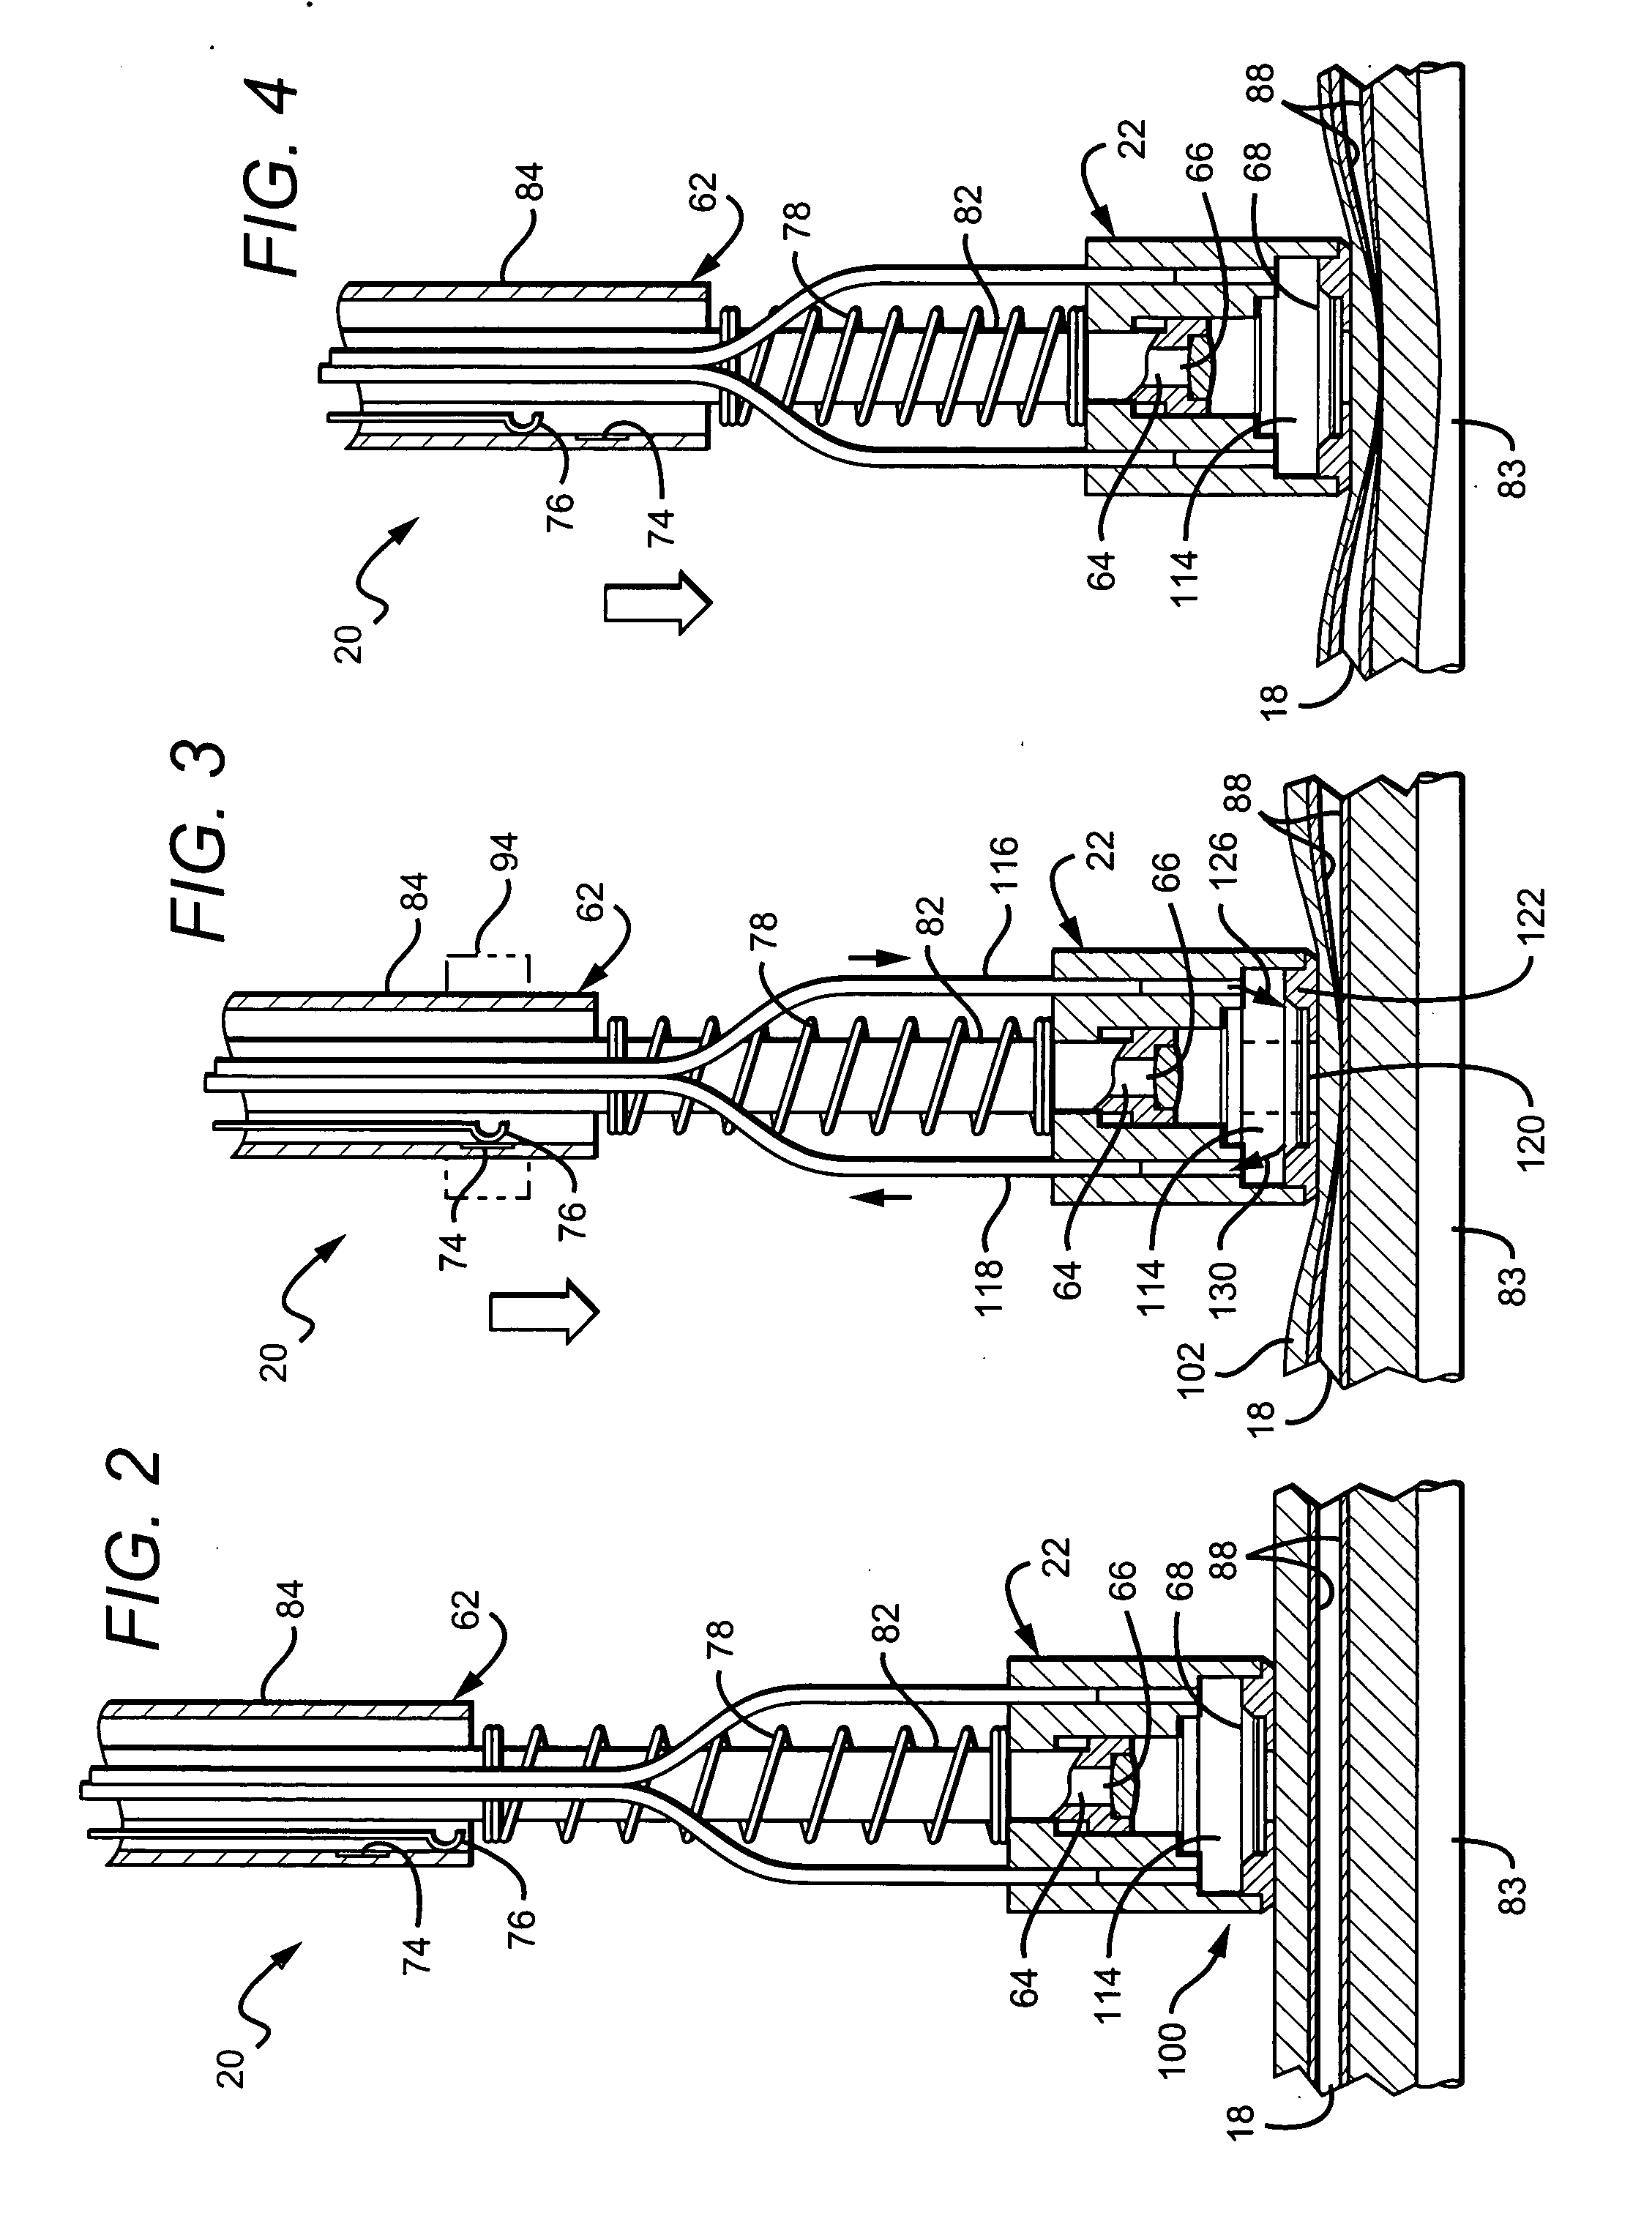 Vascular occlusion systems and methods